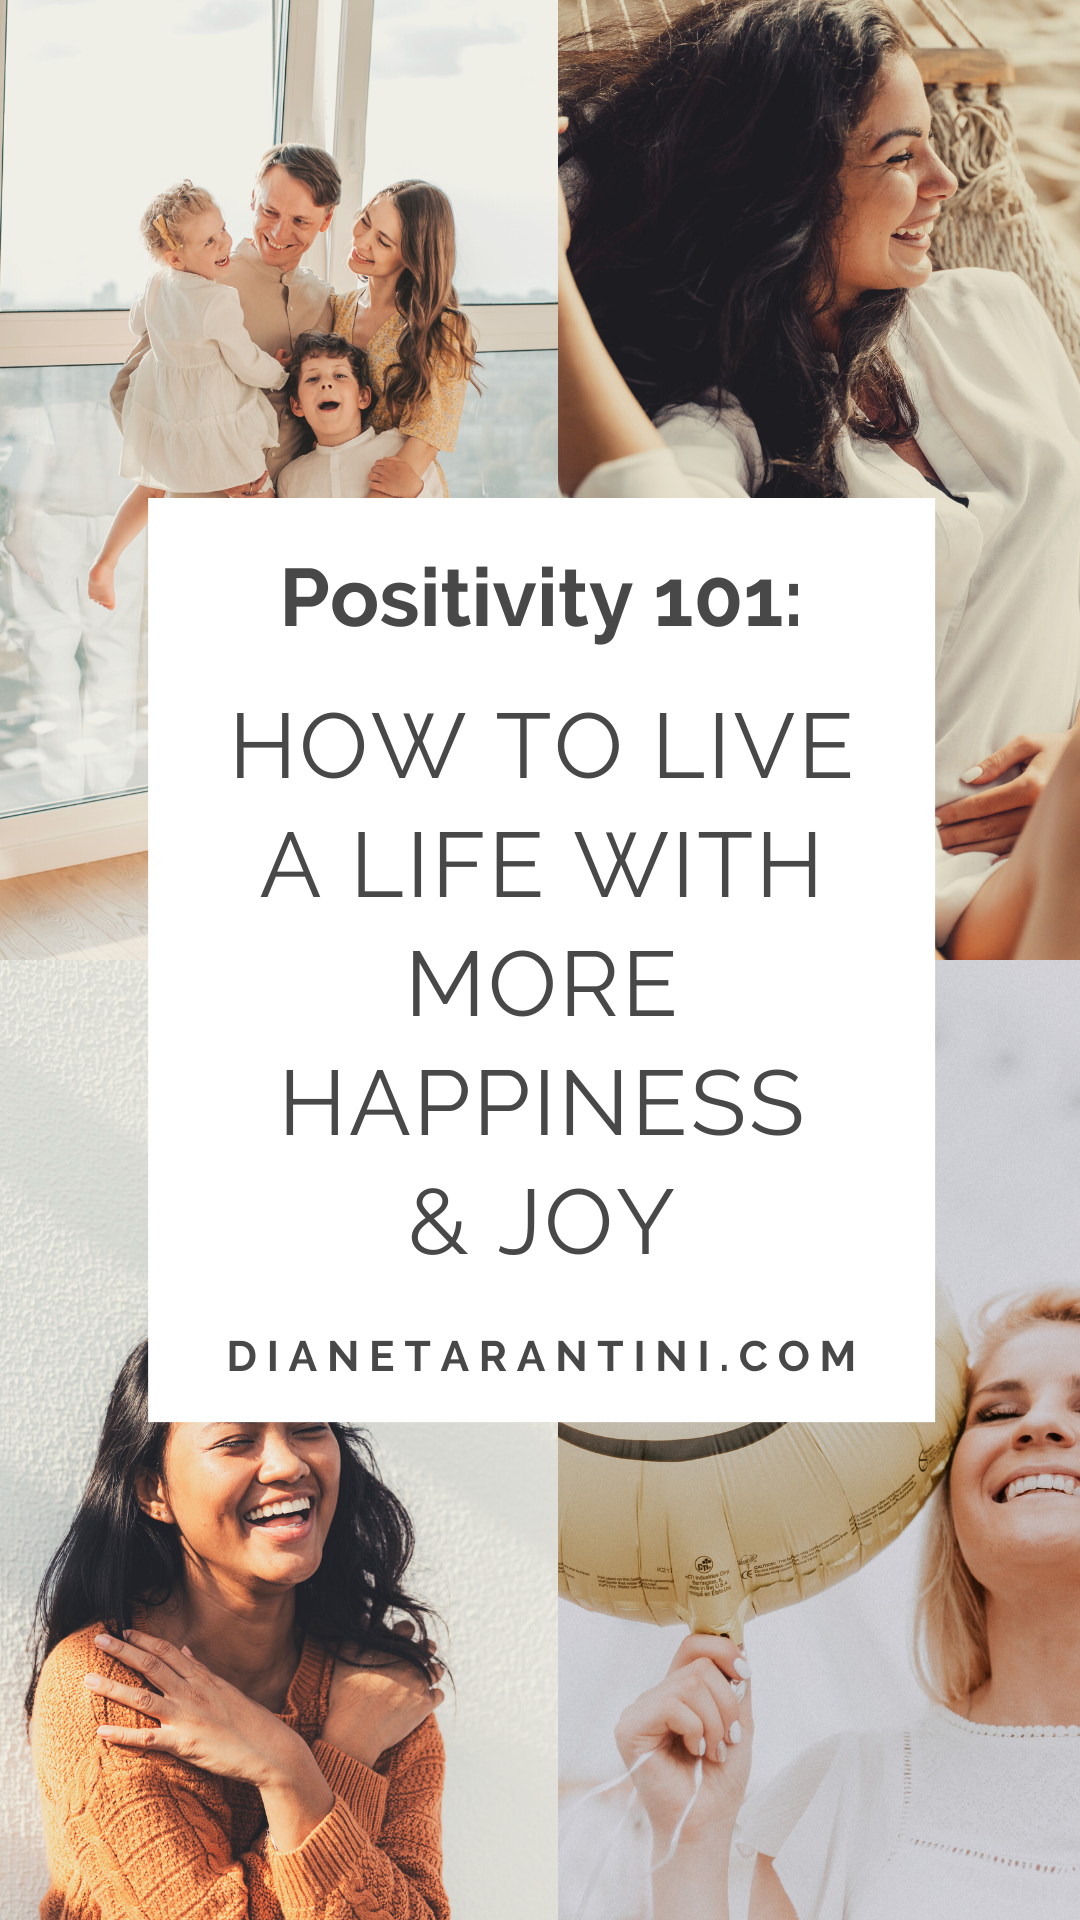 How to live life with more happiness and joy